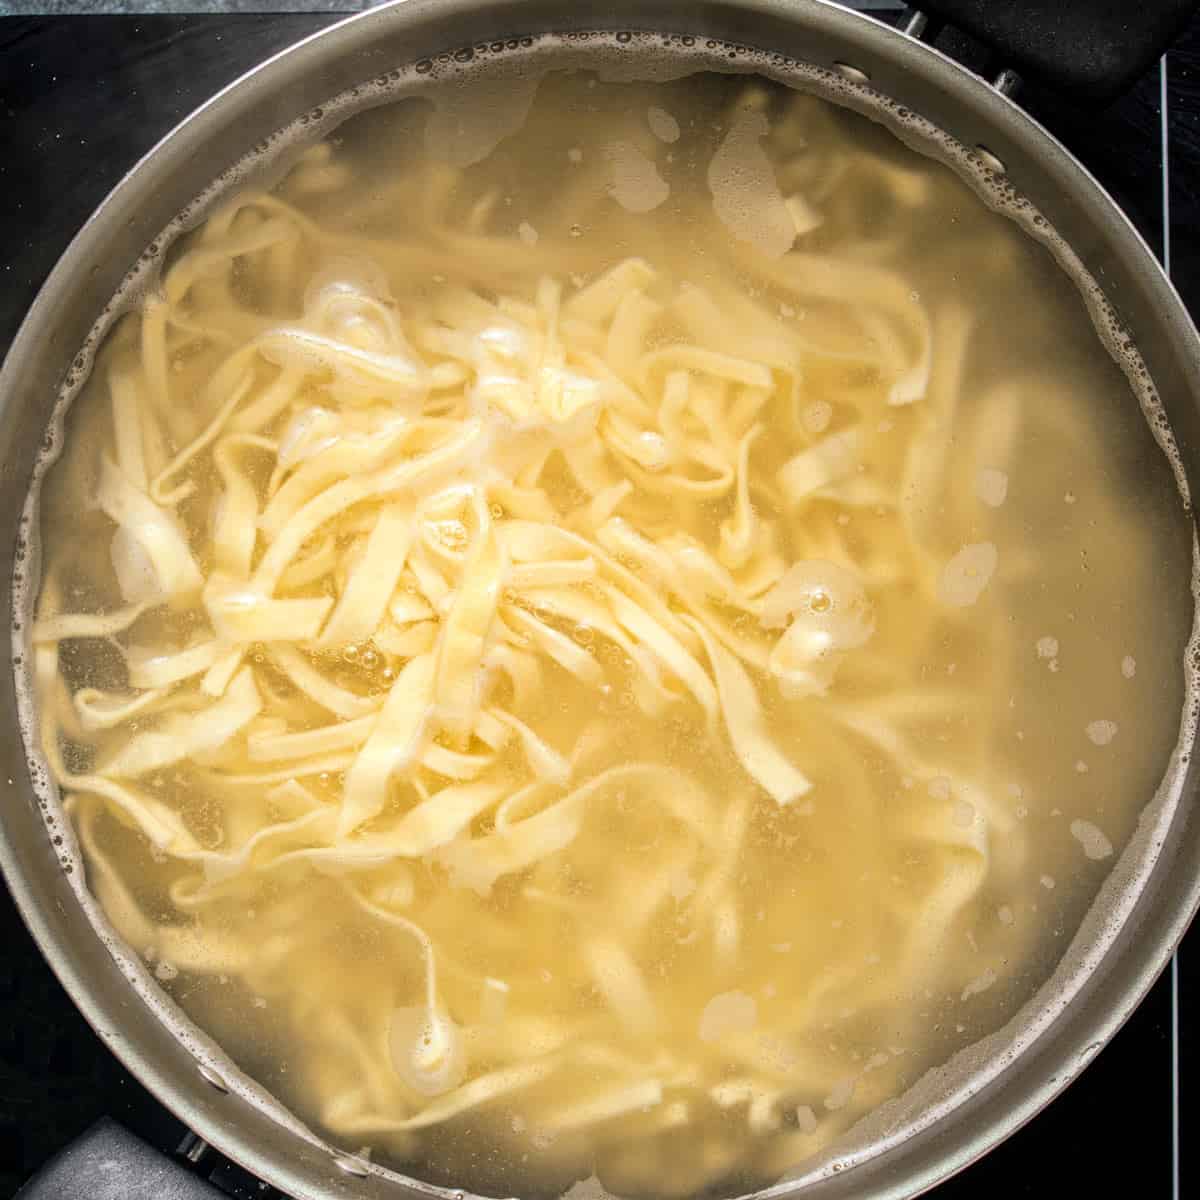 Cooking noodles for fried cabbage and noodles recipe.